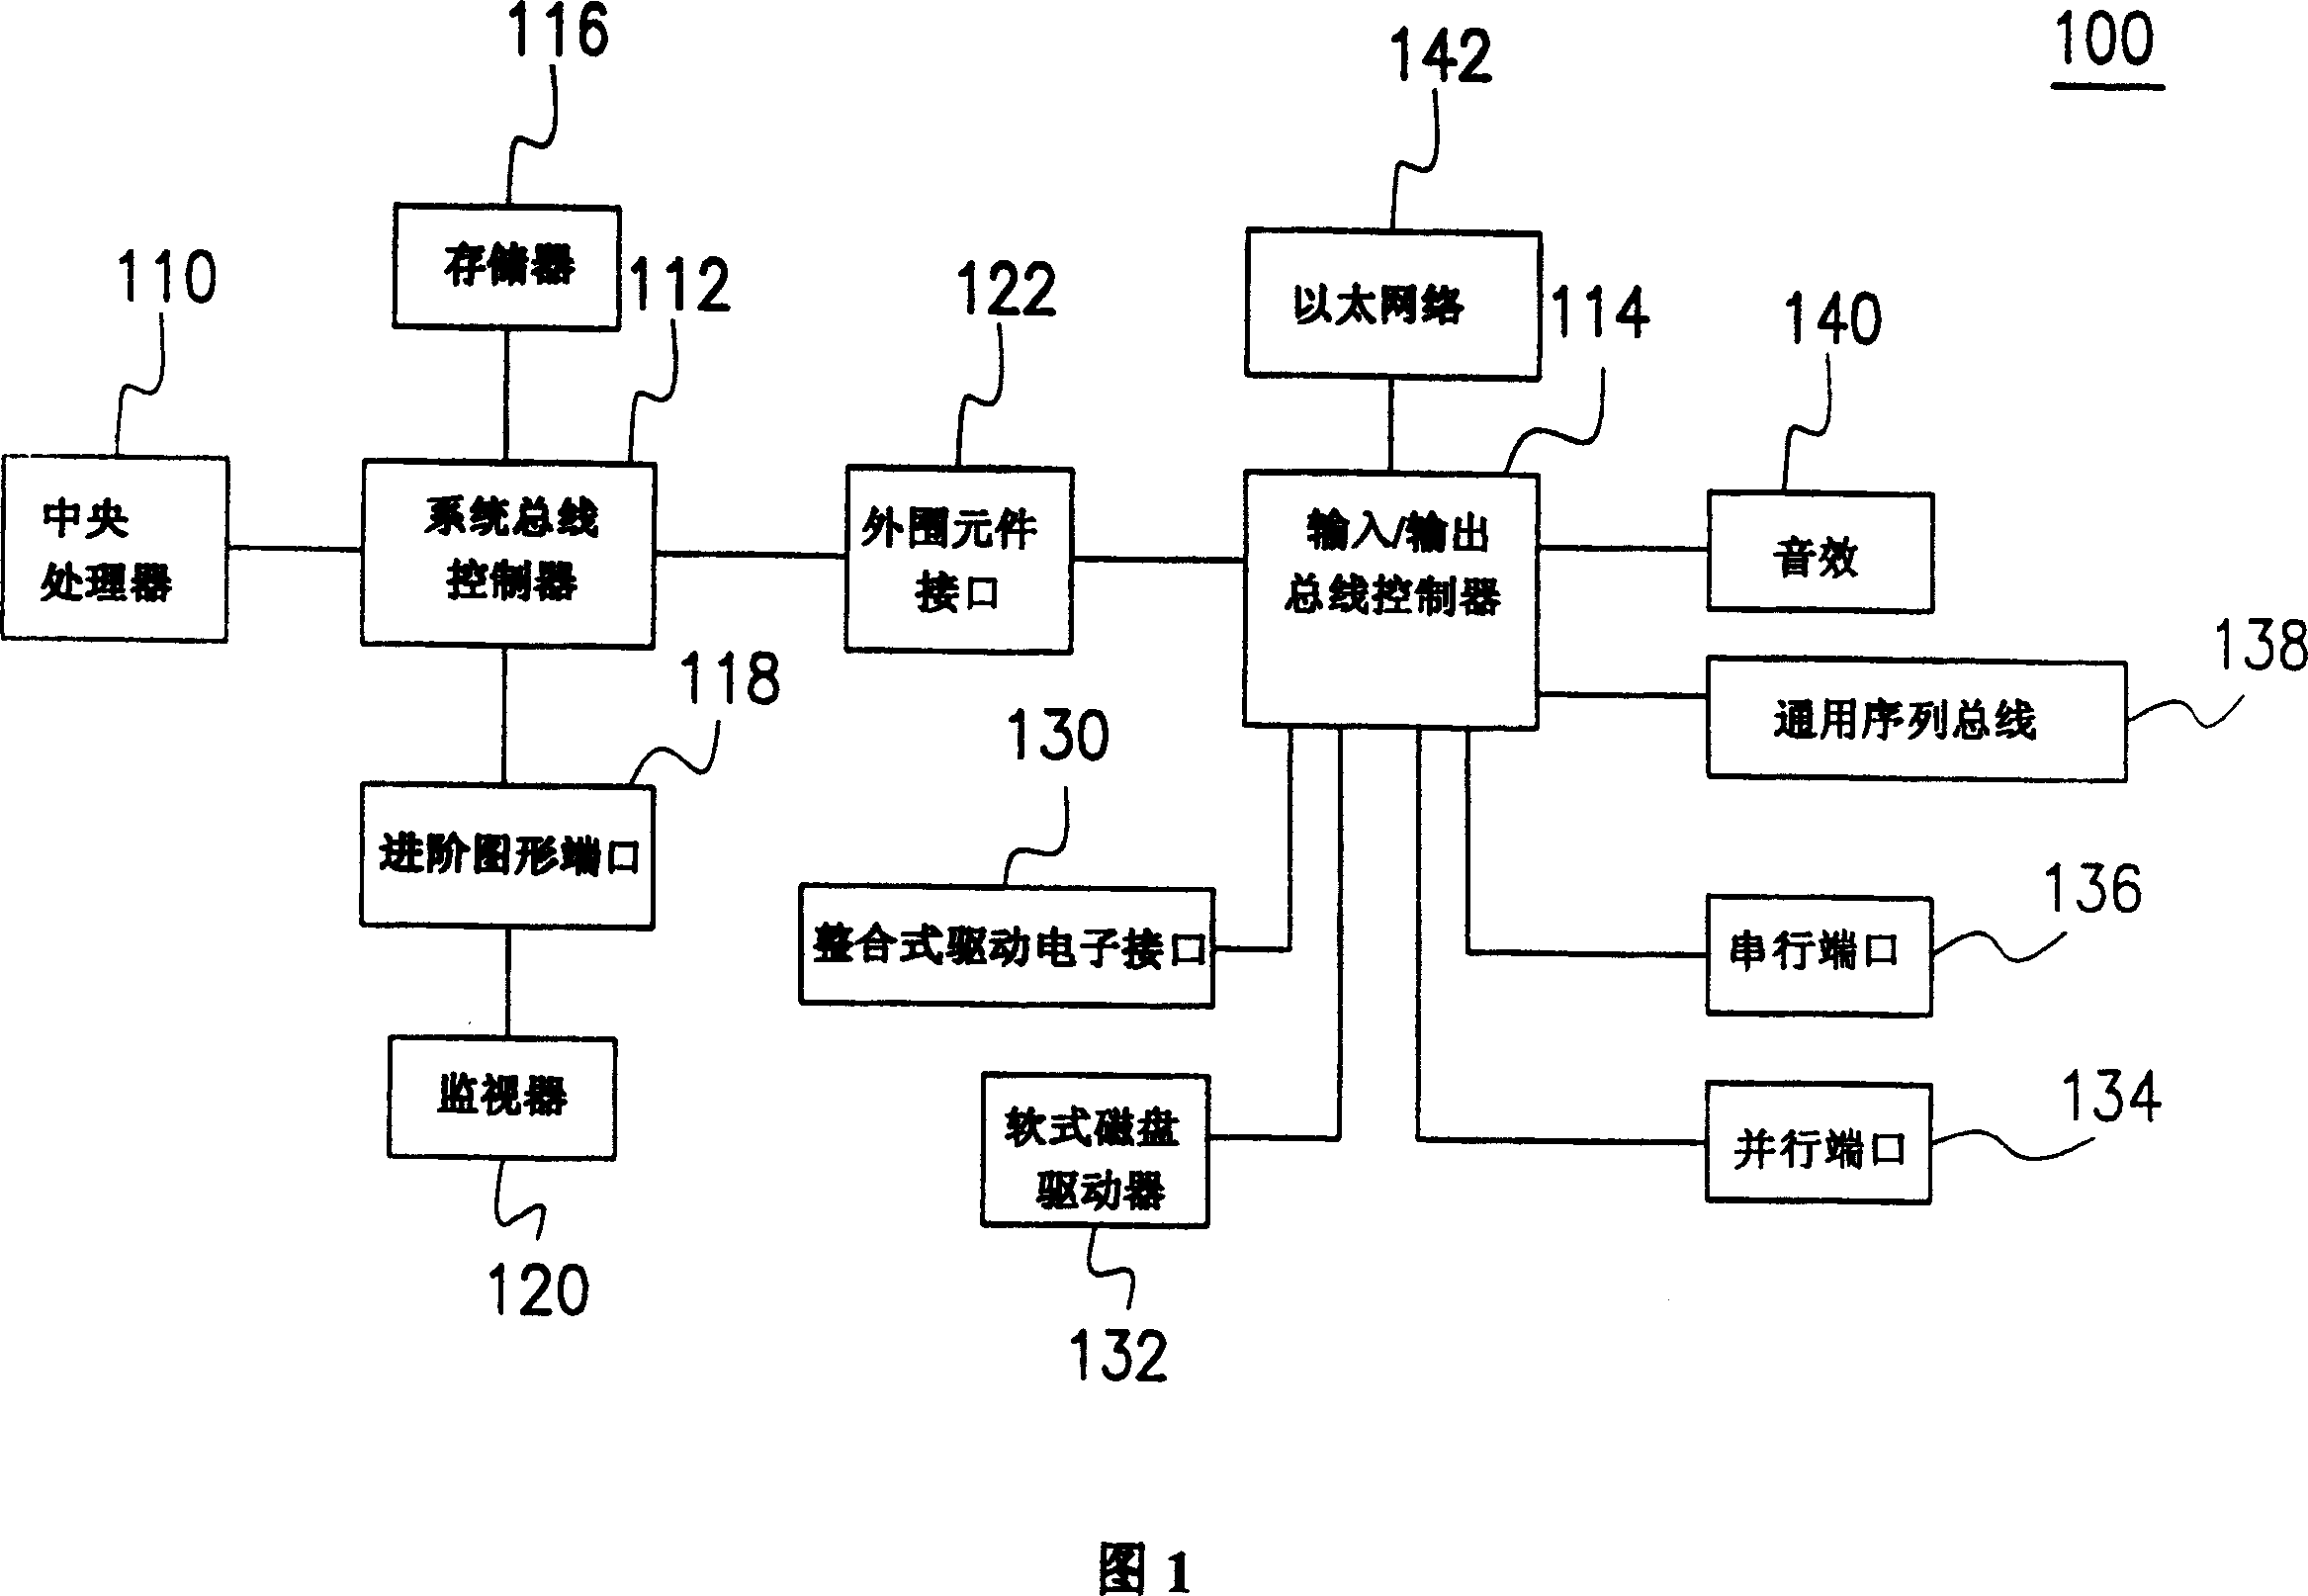 Control method for automatic testing IC complete device